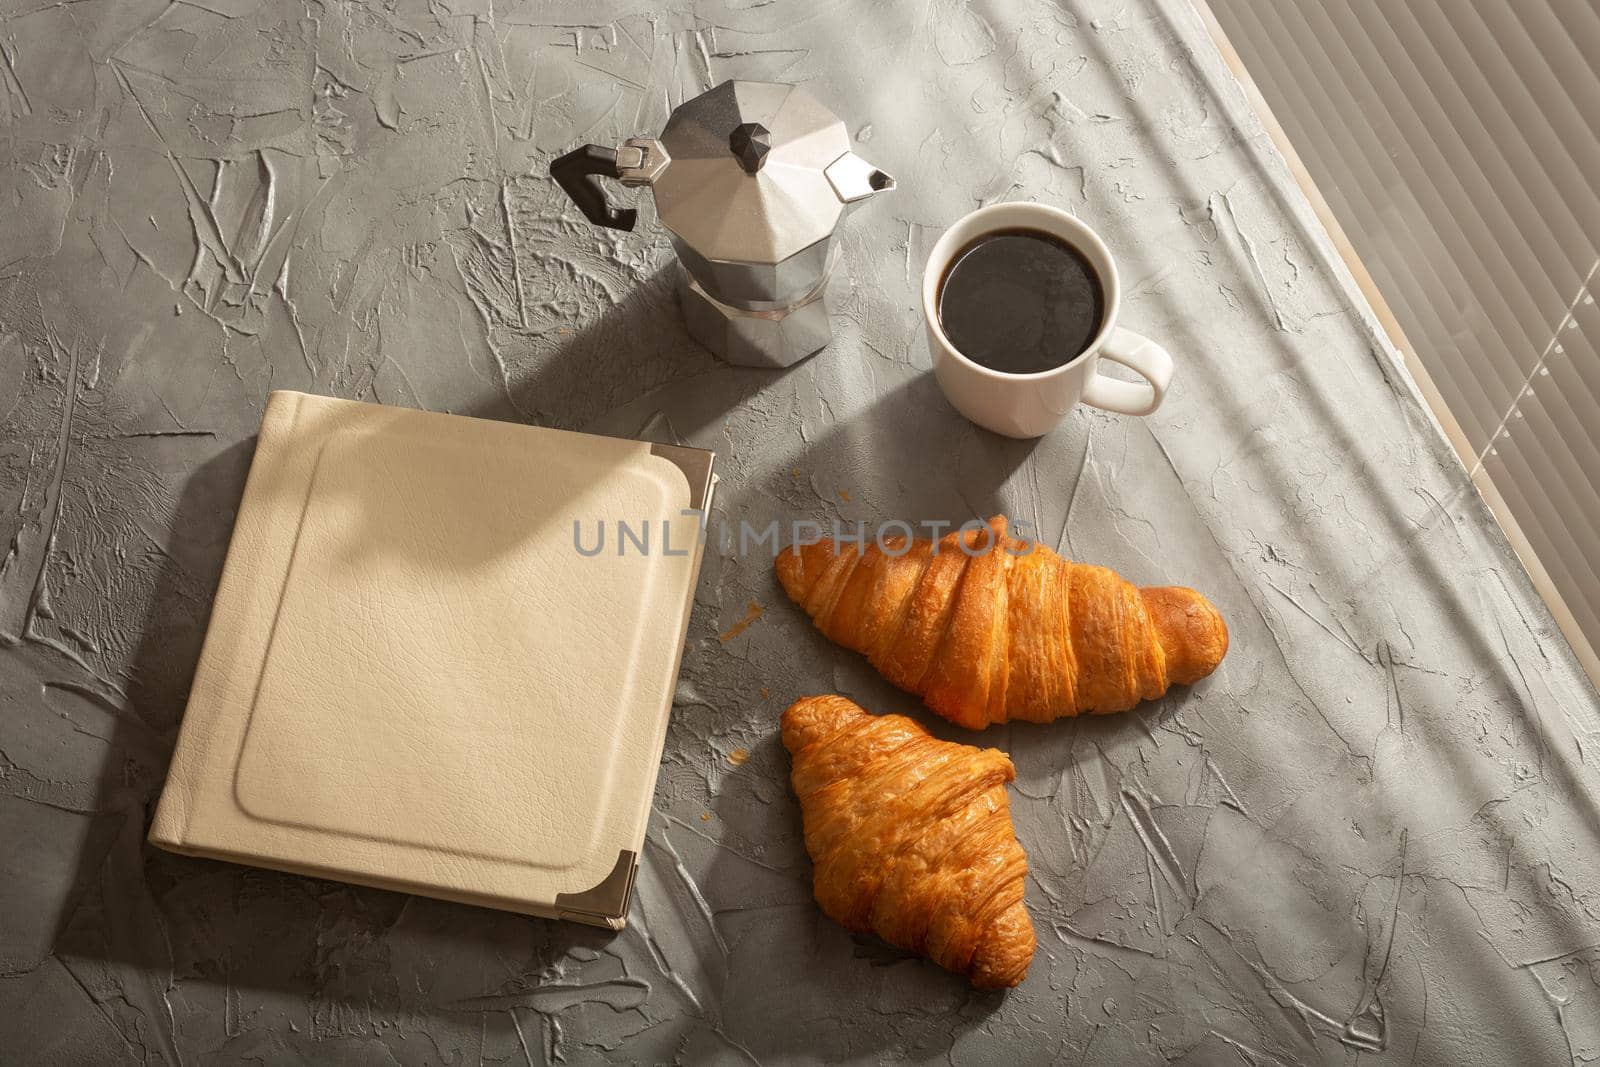 Still life for pleasant morning coffee turk cup and croissants with book on the table. Lunch break concept or start the morning by Satura86